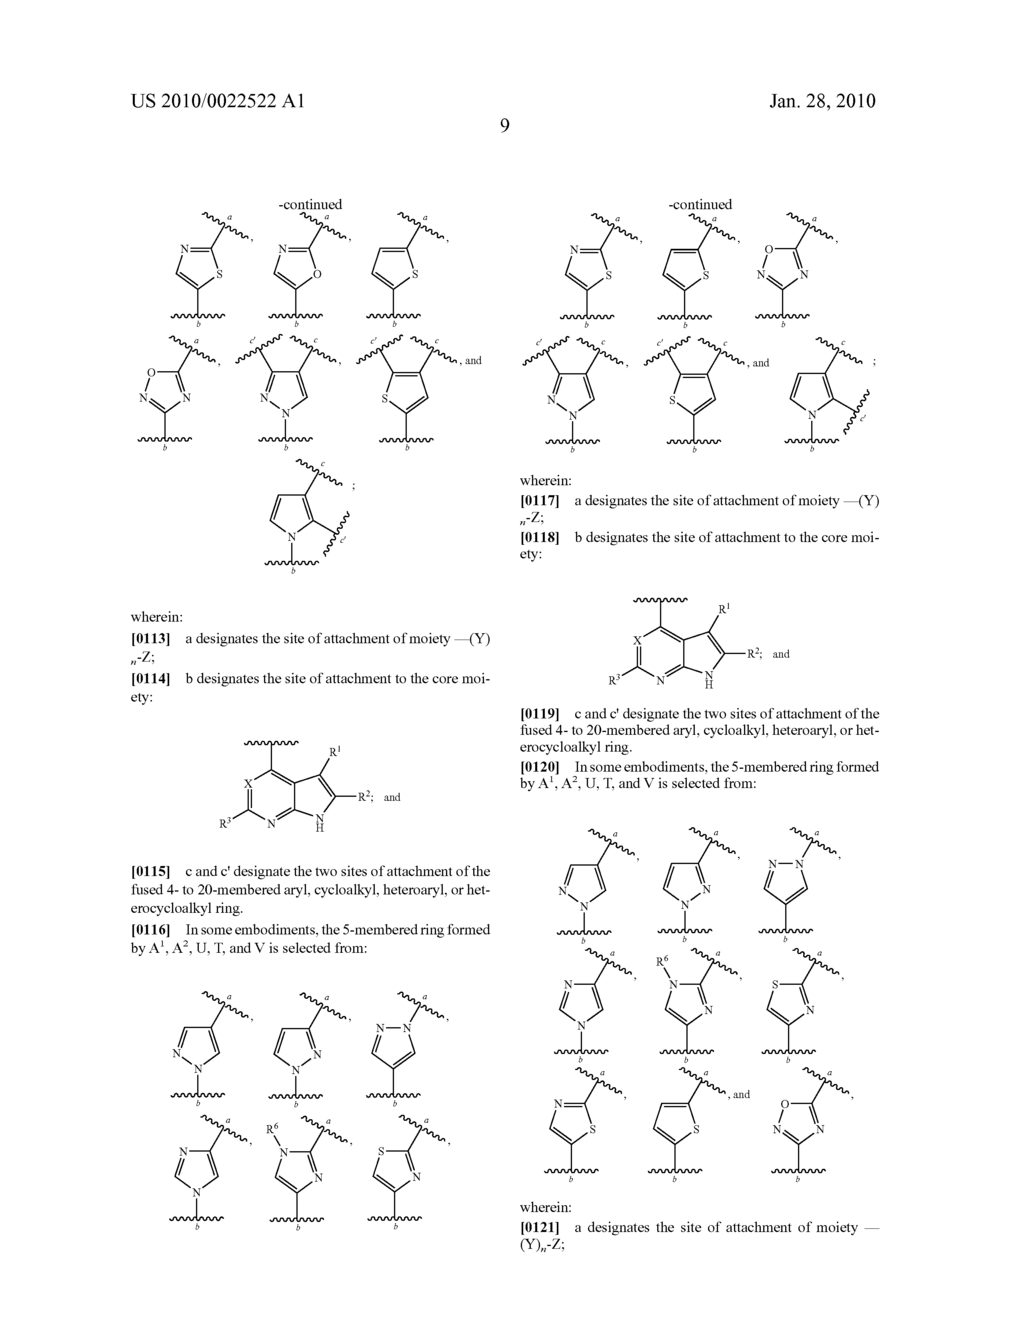 HETEROARYL SUBSTITUTED PYRROLO[2,3-b]PYRIDINES AND PYRROLO[2,3-b]PYRIMIDINES AS JANUS KINASE INHIBITORS - diagram, schematic, and image 10